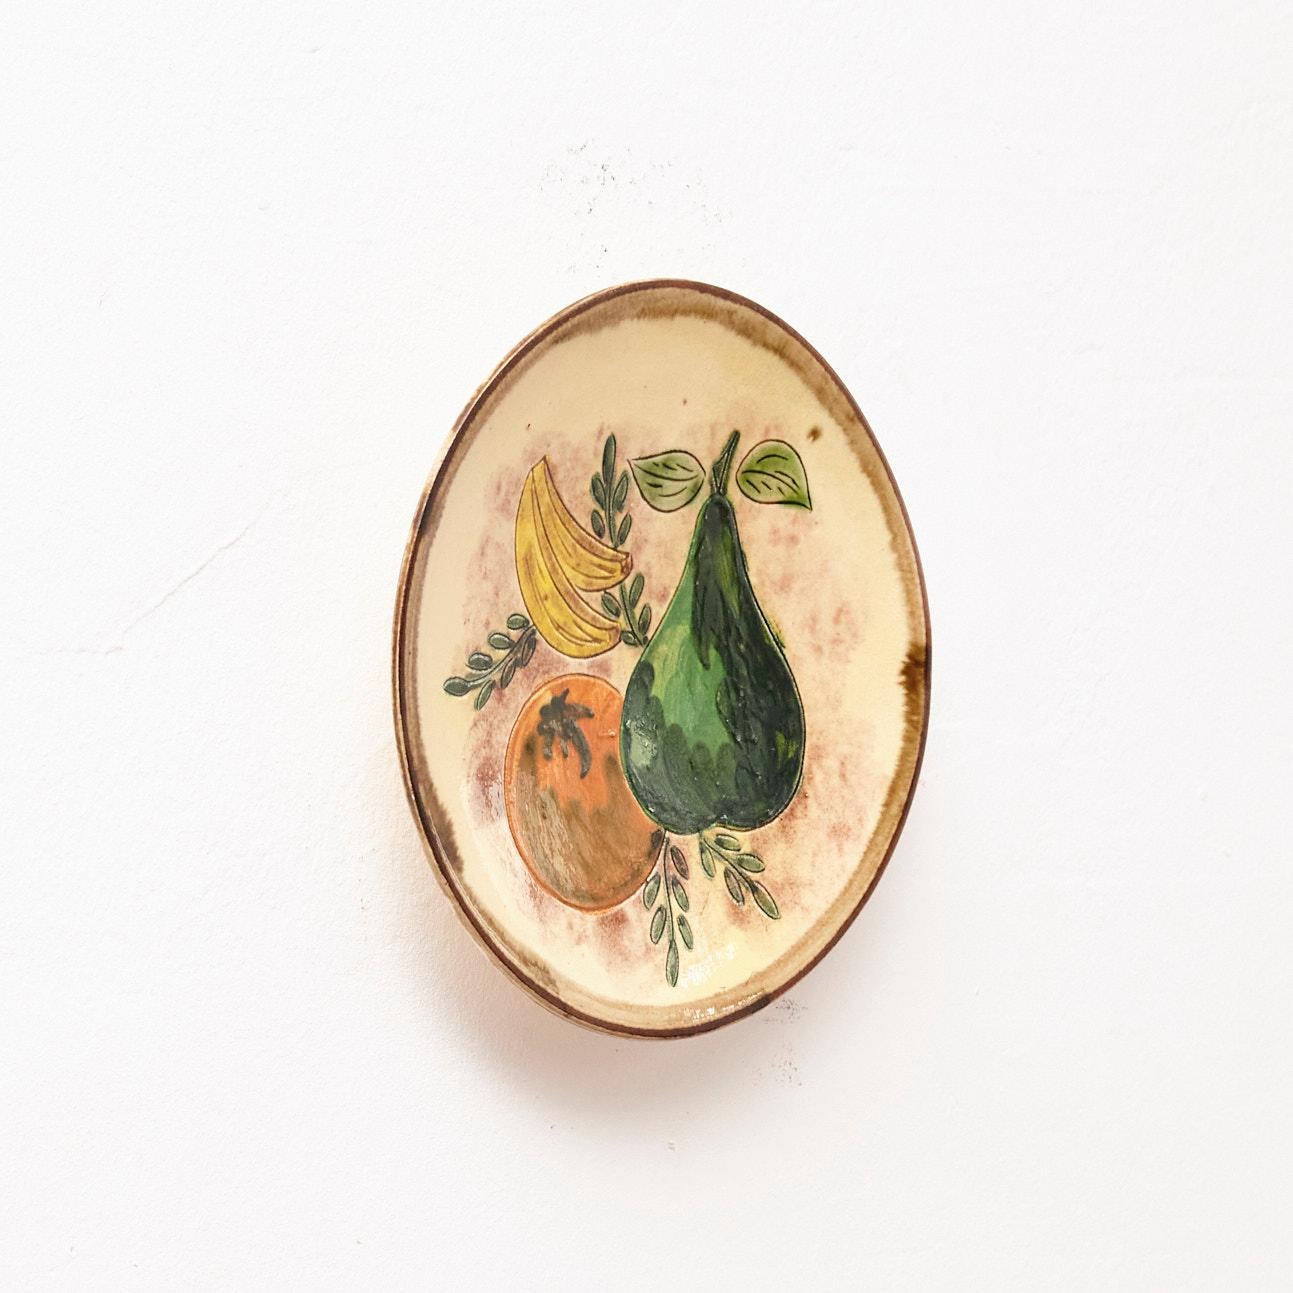 Manufactured France, circa 1950.

Materials:
Ceramic

Dimensions: 
Diam. 23,5 cm x H 2,8 cm

The artwork is in its original condition, showing minor signs of wear consistent with its age and use. These imperfections contribute to the artwork's